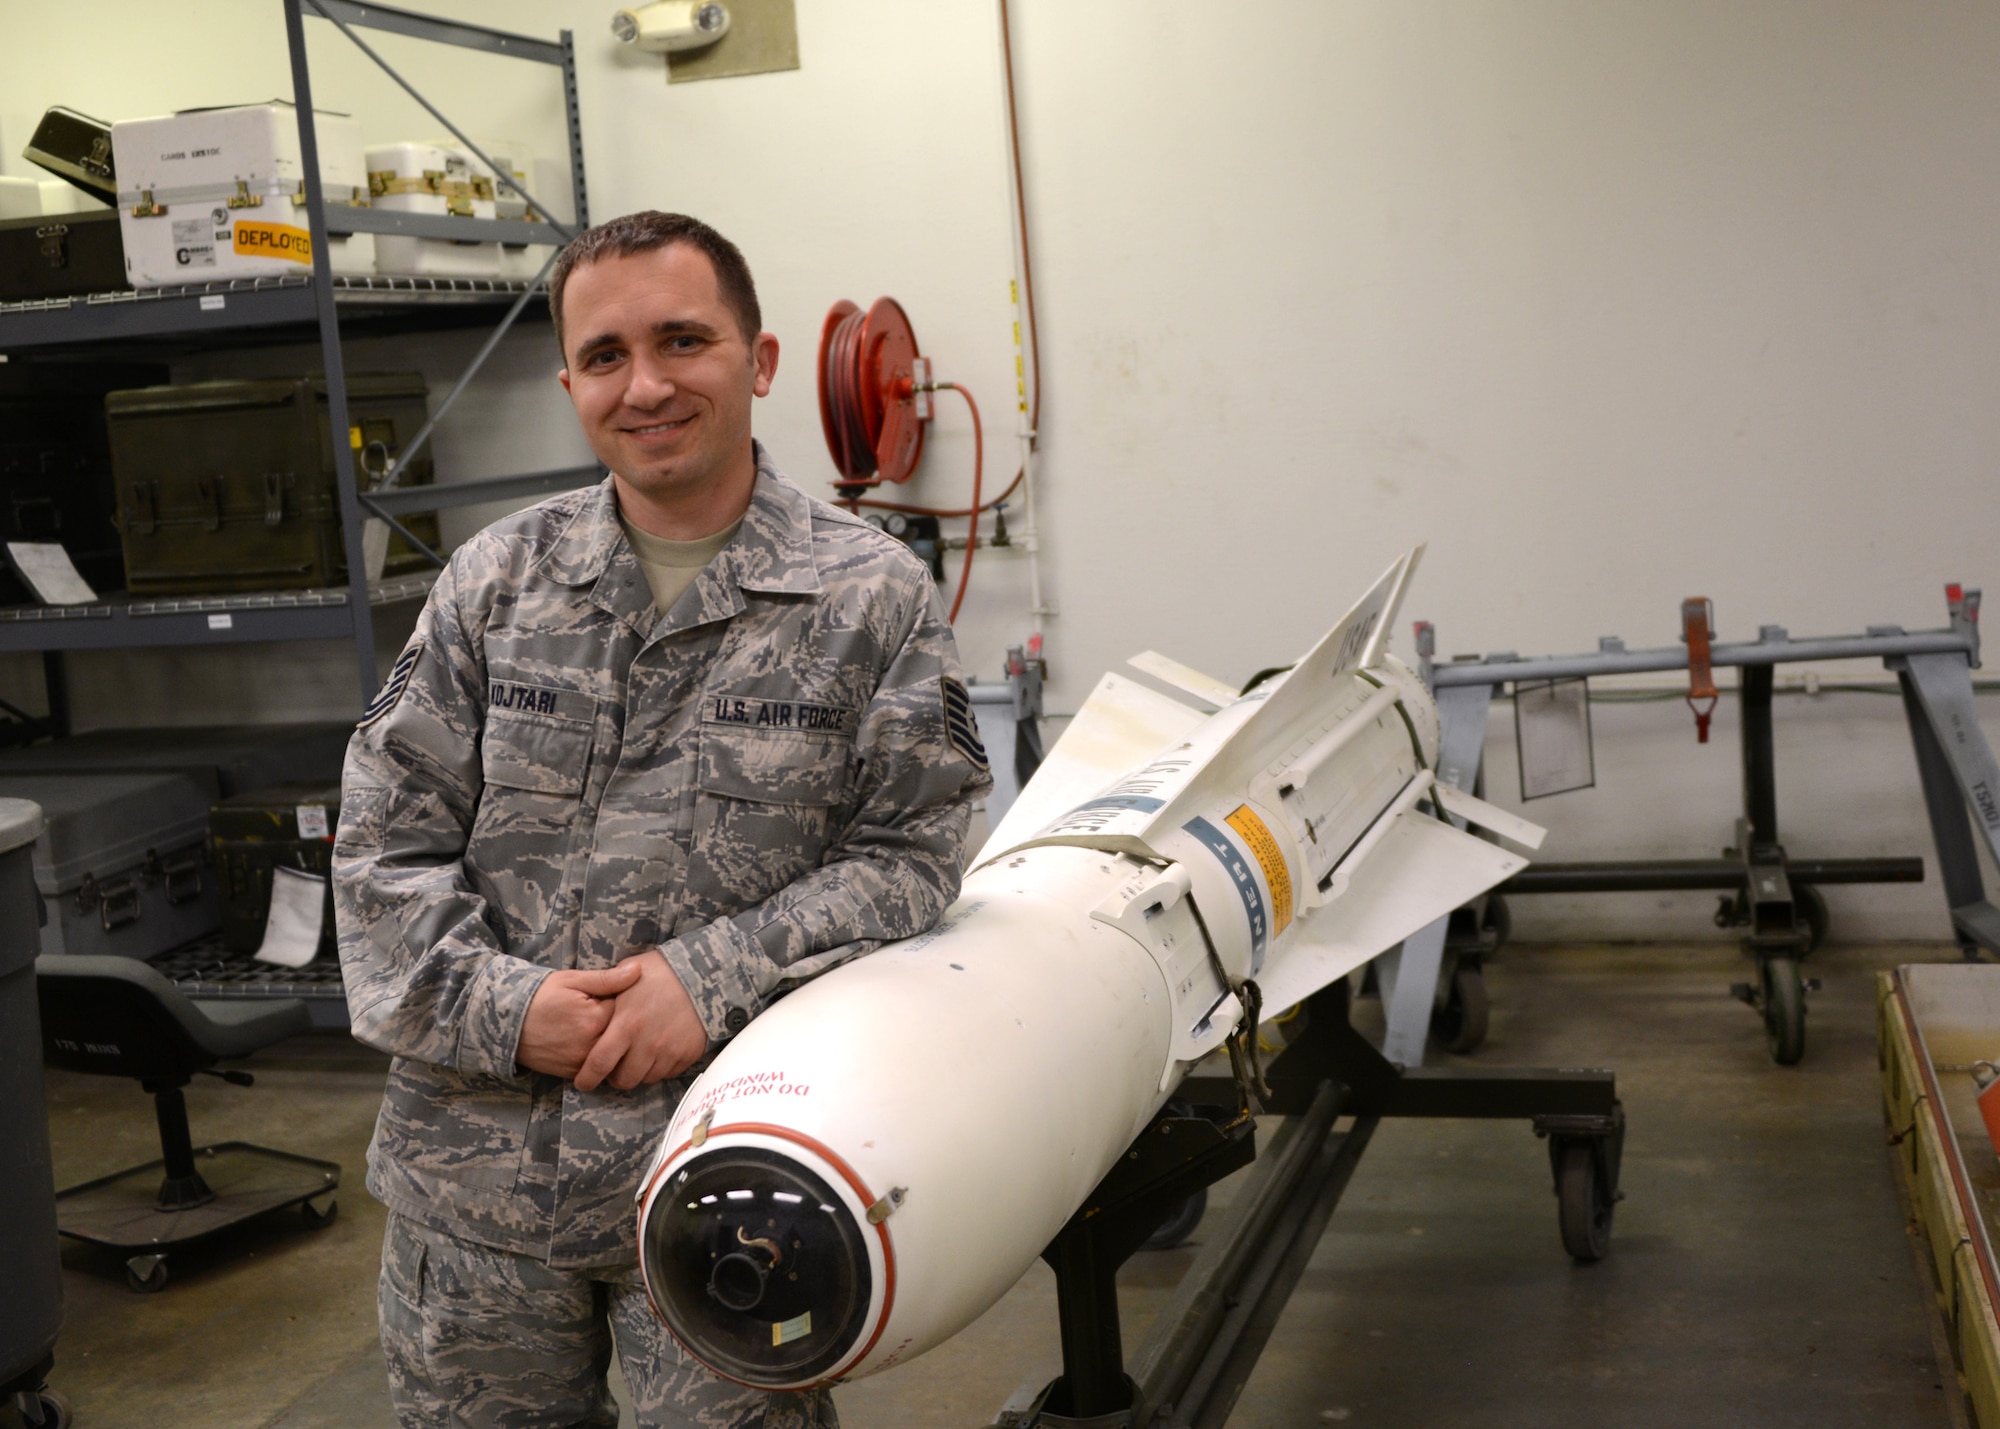 U.S. Air Force Tech. Sgt. Ilir Kojtari, precision guided munitions section non-commissioned officer in charge (NCOIC), 175th Wing Maryland Air National Guard, stands next to an AGM-65A missile maintenance trainer at Warfield Air National Guard Base, Baltimore, Maryland, May 15, 2014. The missile trainer is a non-explosive device that is used to train maintenance personnel on the weapon system.  (U.S. Air National Guard photo by Tech. Sgt. Christopher Schepers/RELEASED)